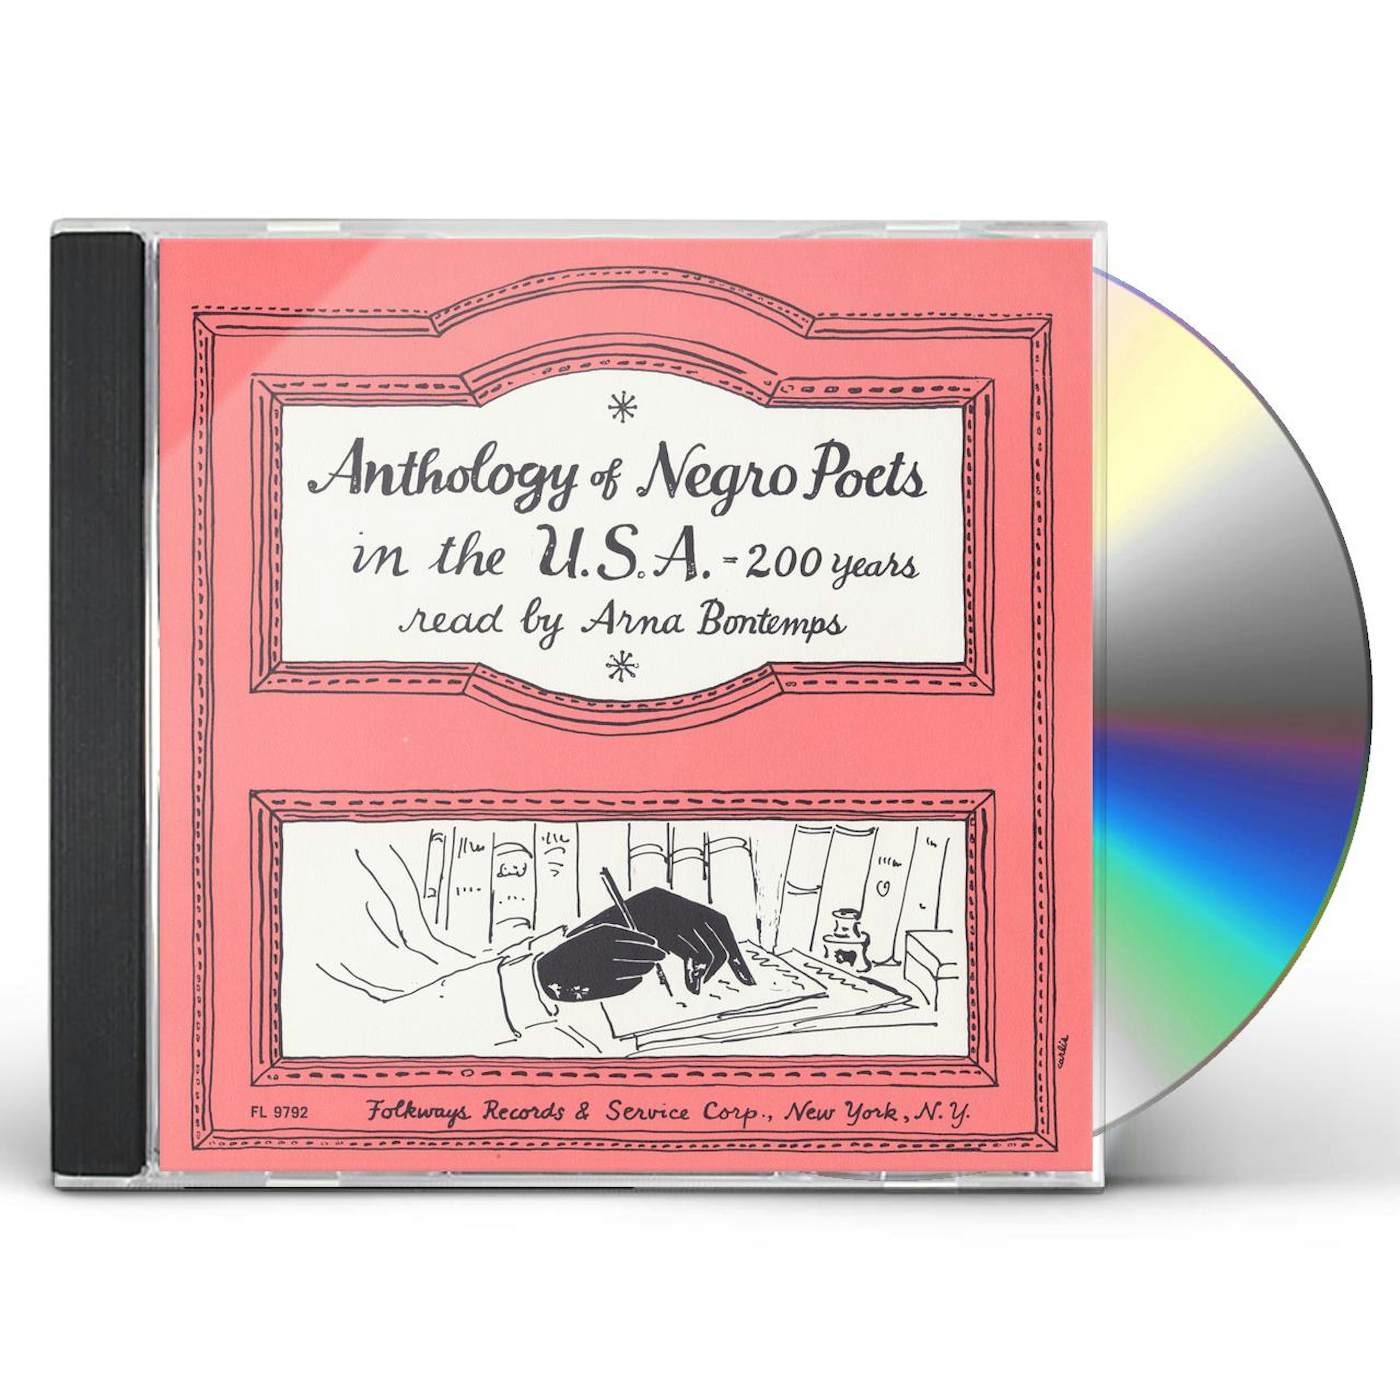 Arna Bontemps ANTHOLOGY OF NEGRO POETS IN THE U.S.A. - 200 YEARS CD